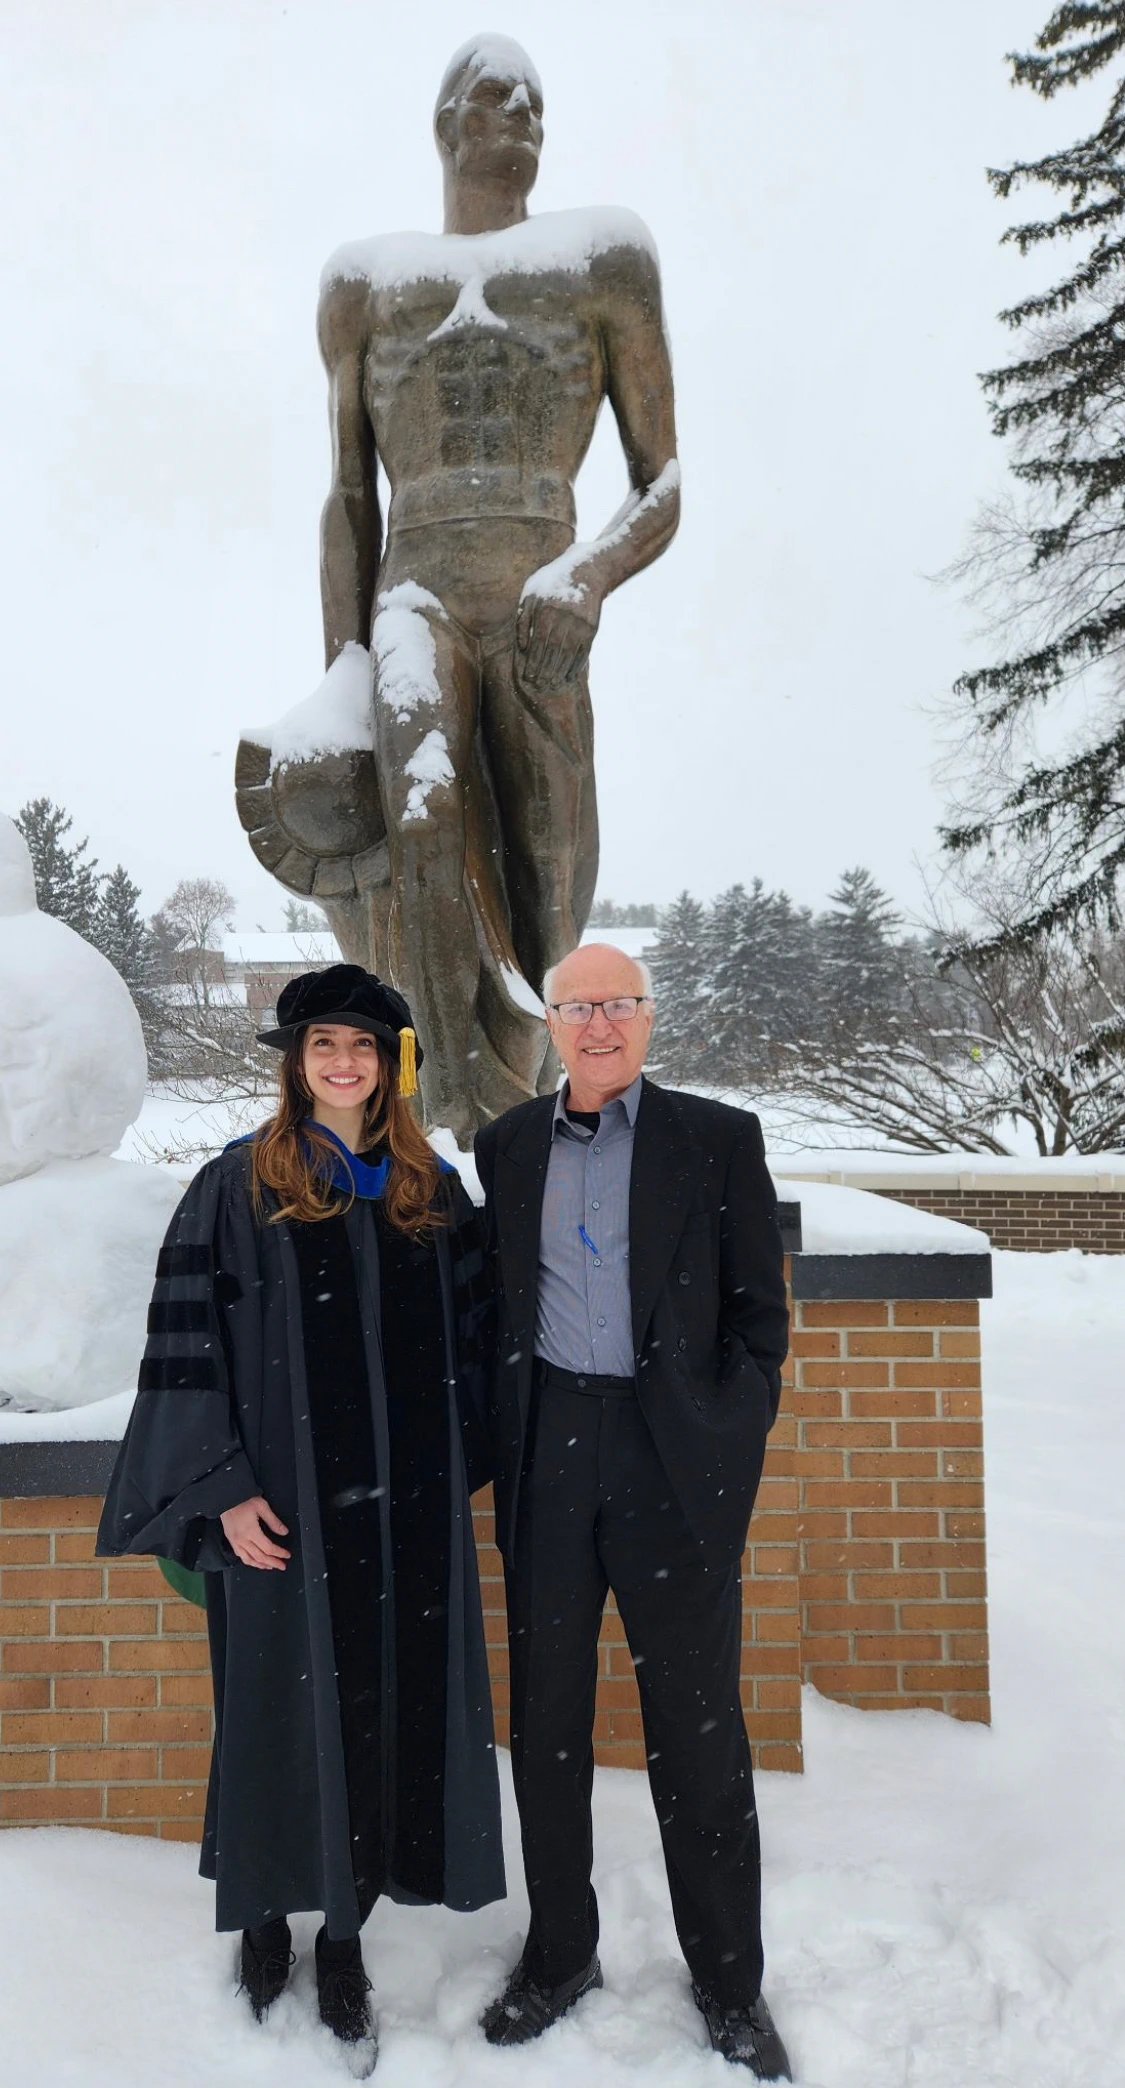 Yasi Zamani-Hank and her father, Bahram Zamani, in front of The Spartan Statue on Dec. 24. Photograph by Jeffrey Hank. 